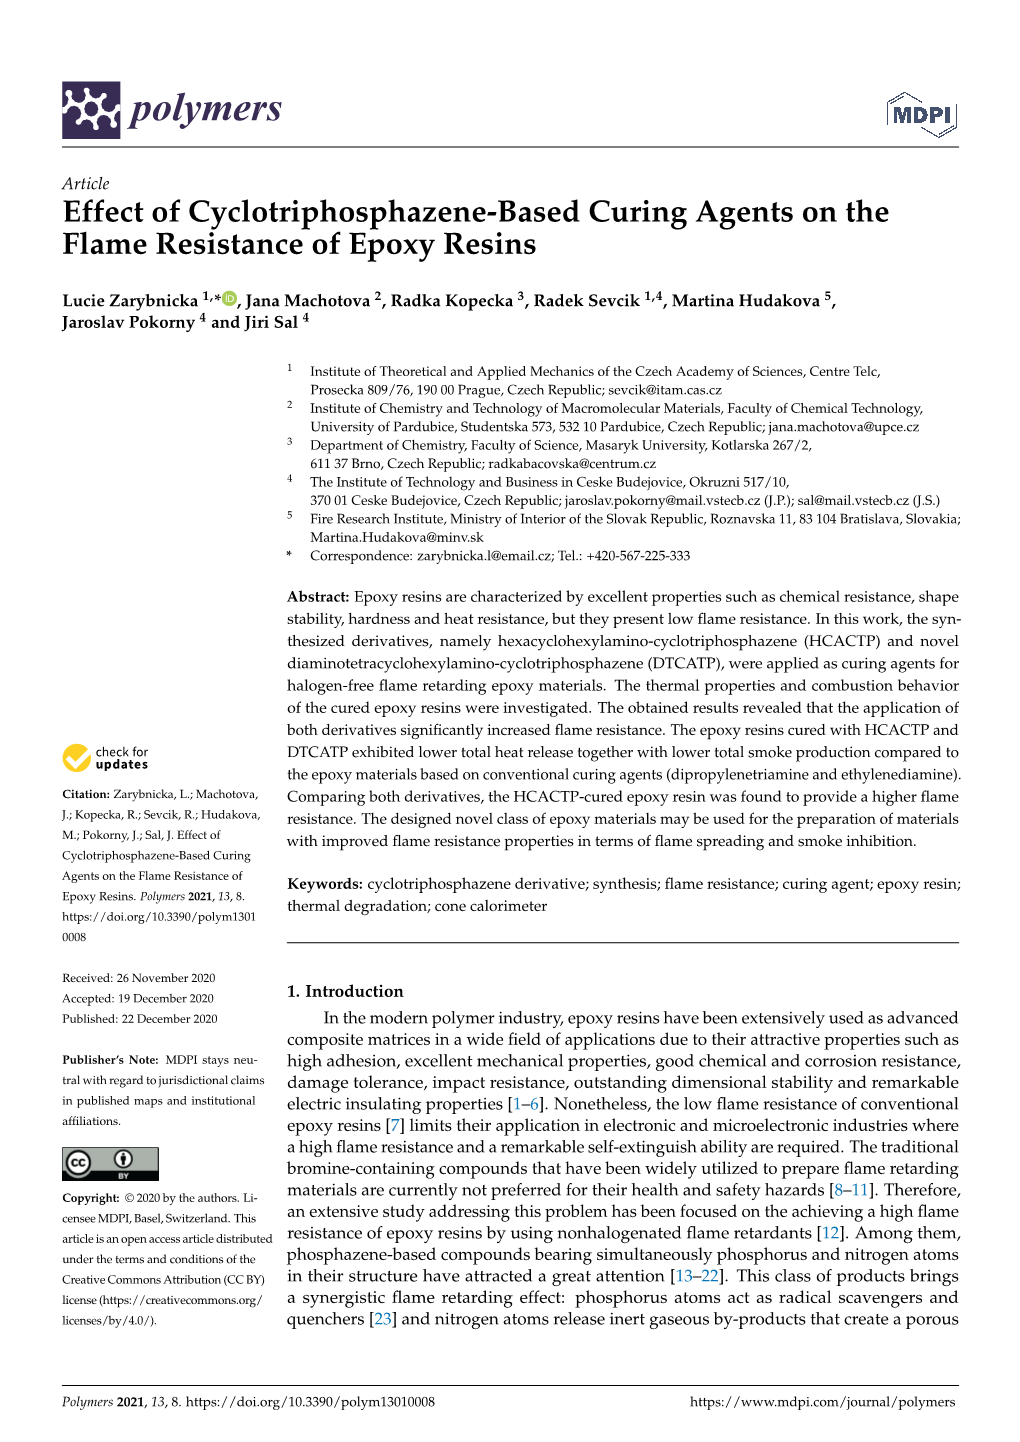 Effect of Cyclotriphosphazene-Based Curing Agents on the Flame Resistance of Epoxy Resins